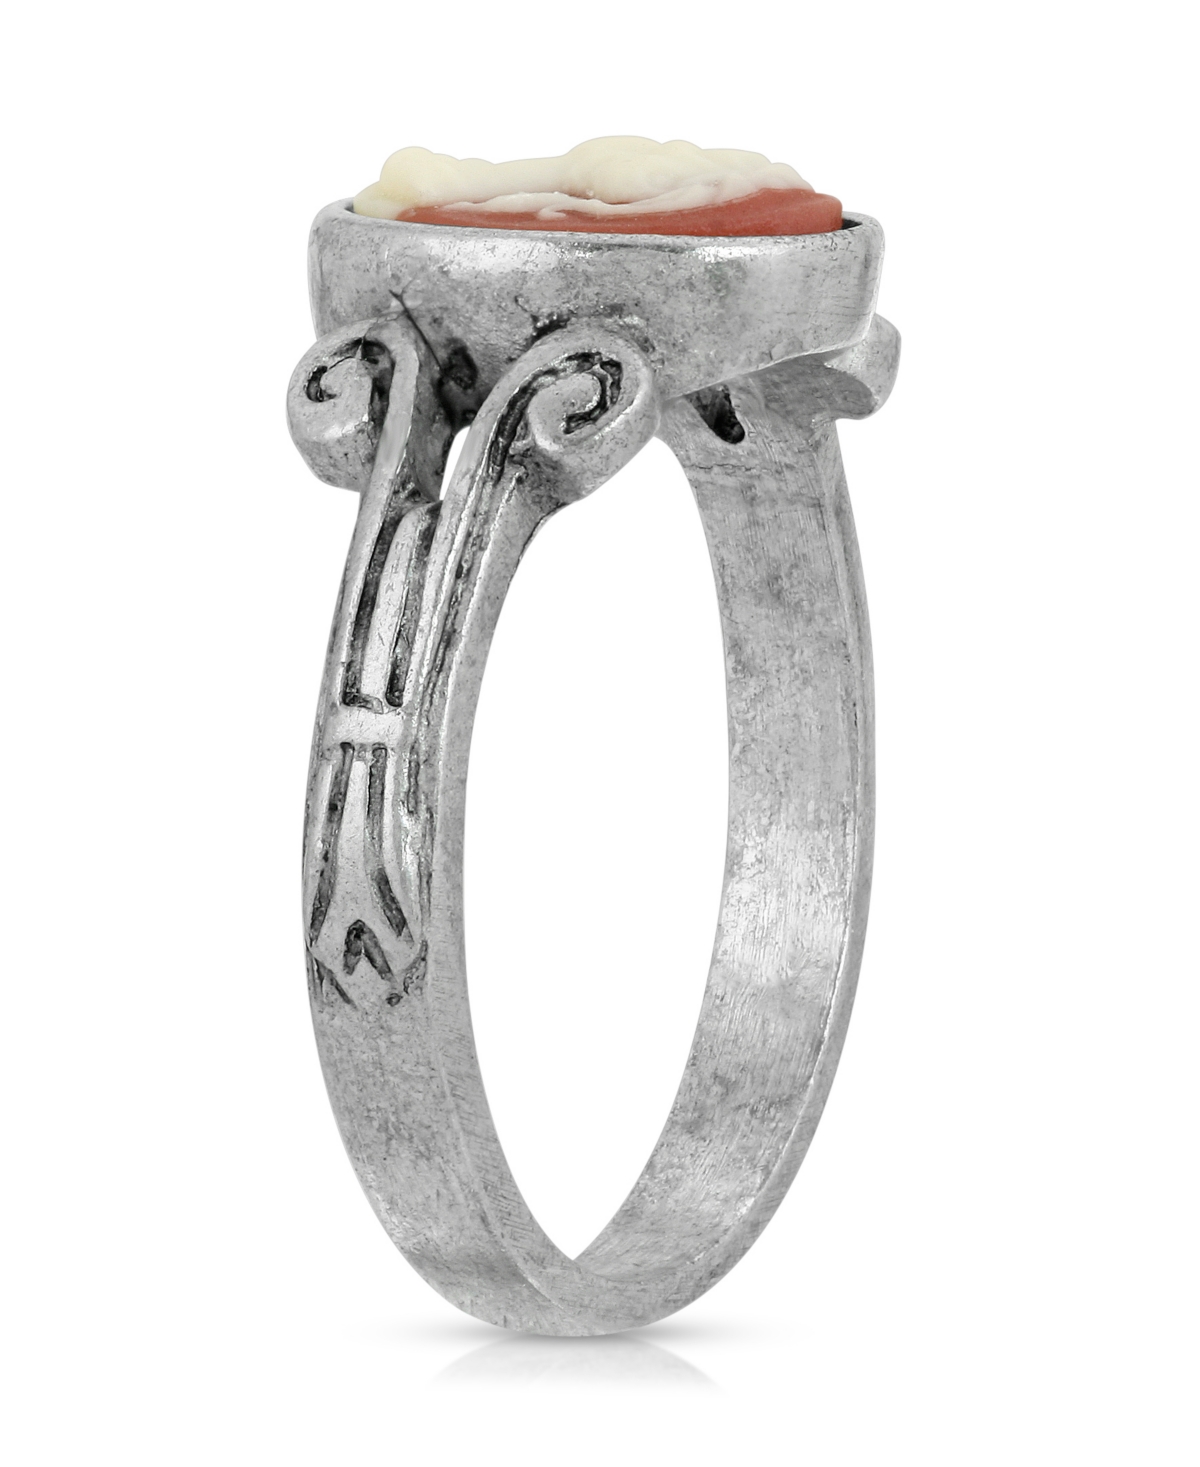 Shop 2028 Pewter Carnelian Cameo Oval Ring In Orange